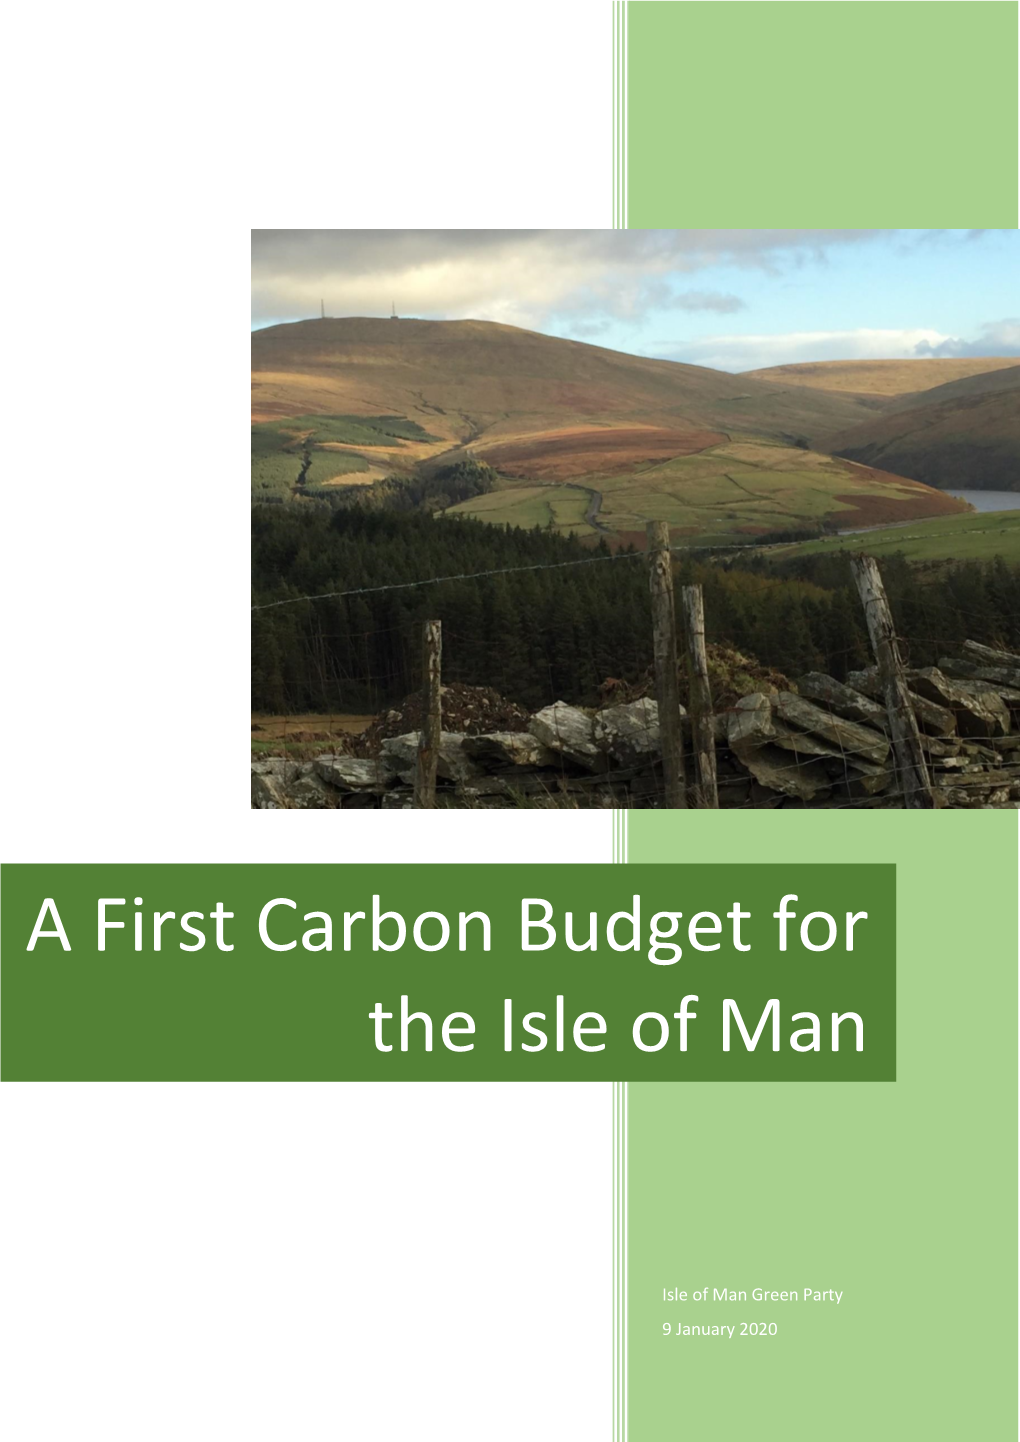 A First Carbon Budget for the Isle of Man